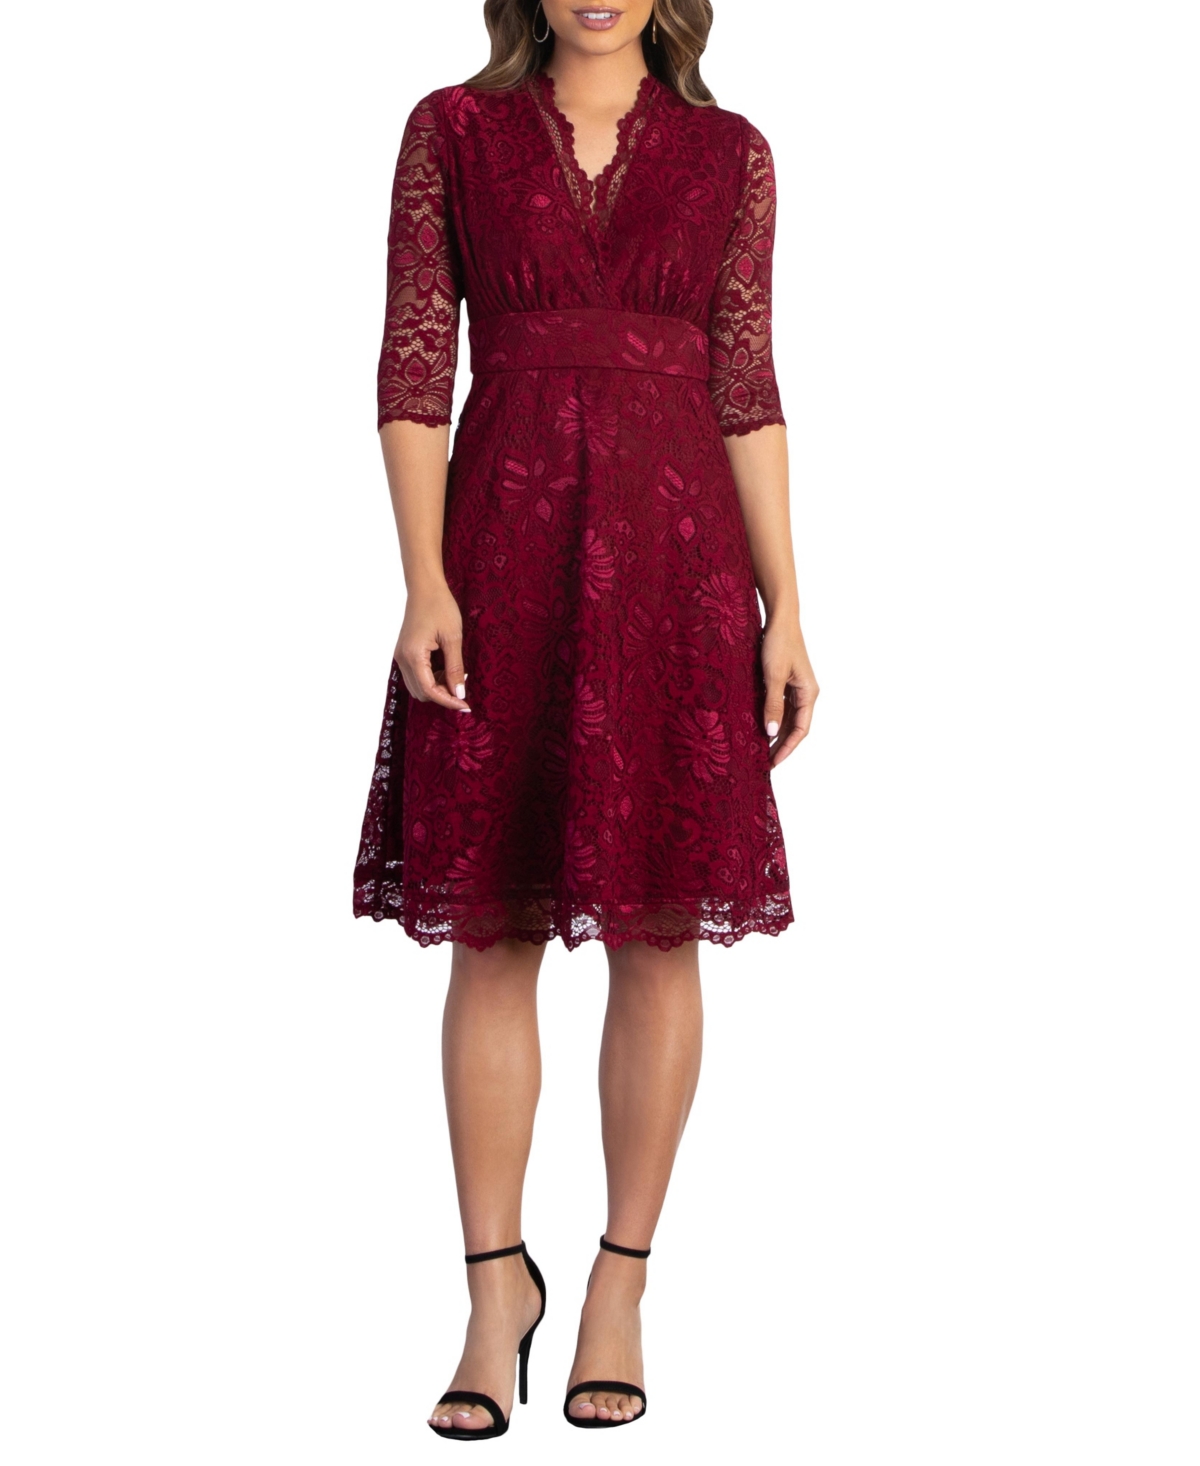 KIYONNA WOMEN'S MADEMOISELLE LACE COCKTAIL DRESS WITH SLEEVES